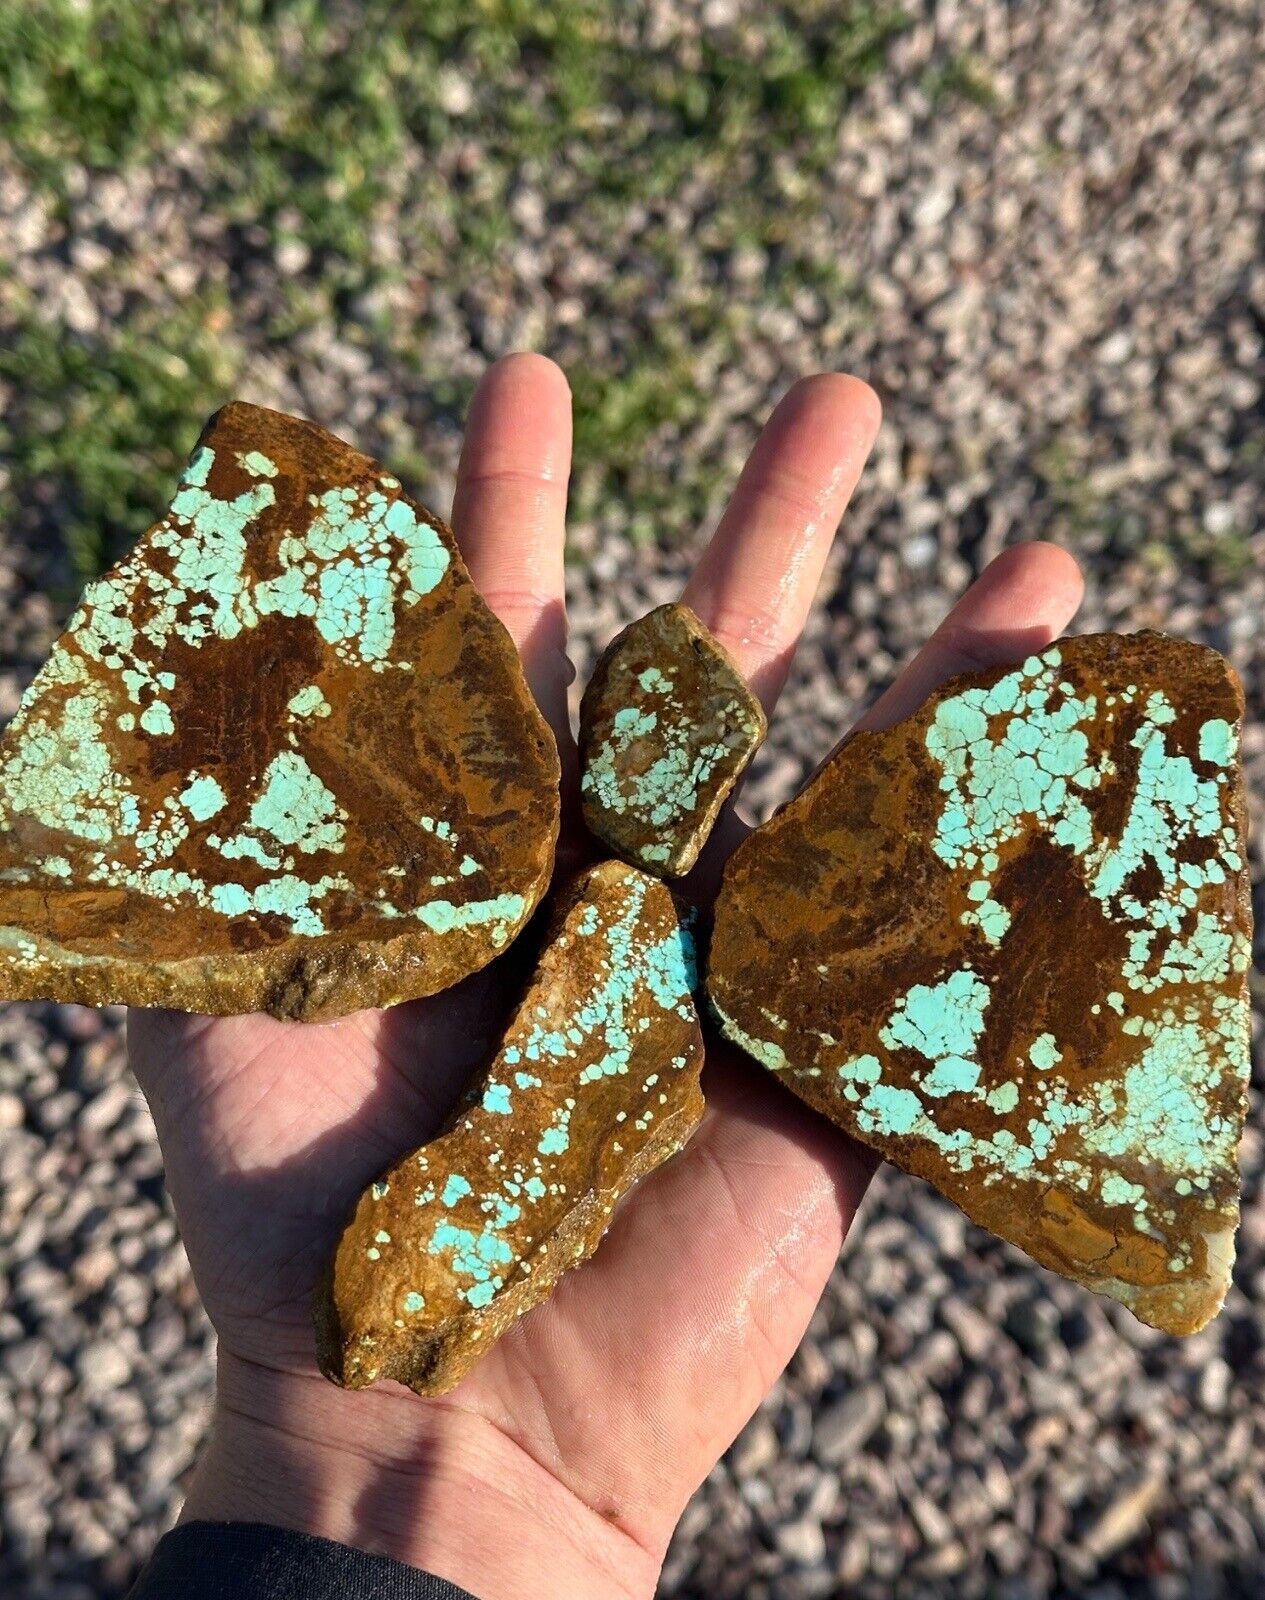 NV#8 Turquoise Butterfly No crumble. Double-stable. (376 g.) Get what you see